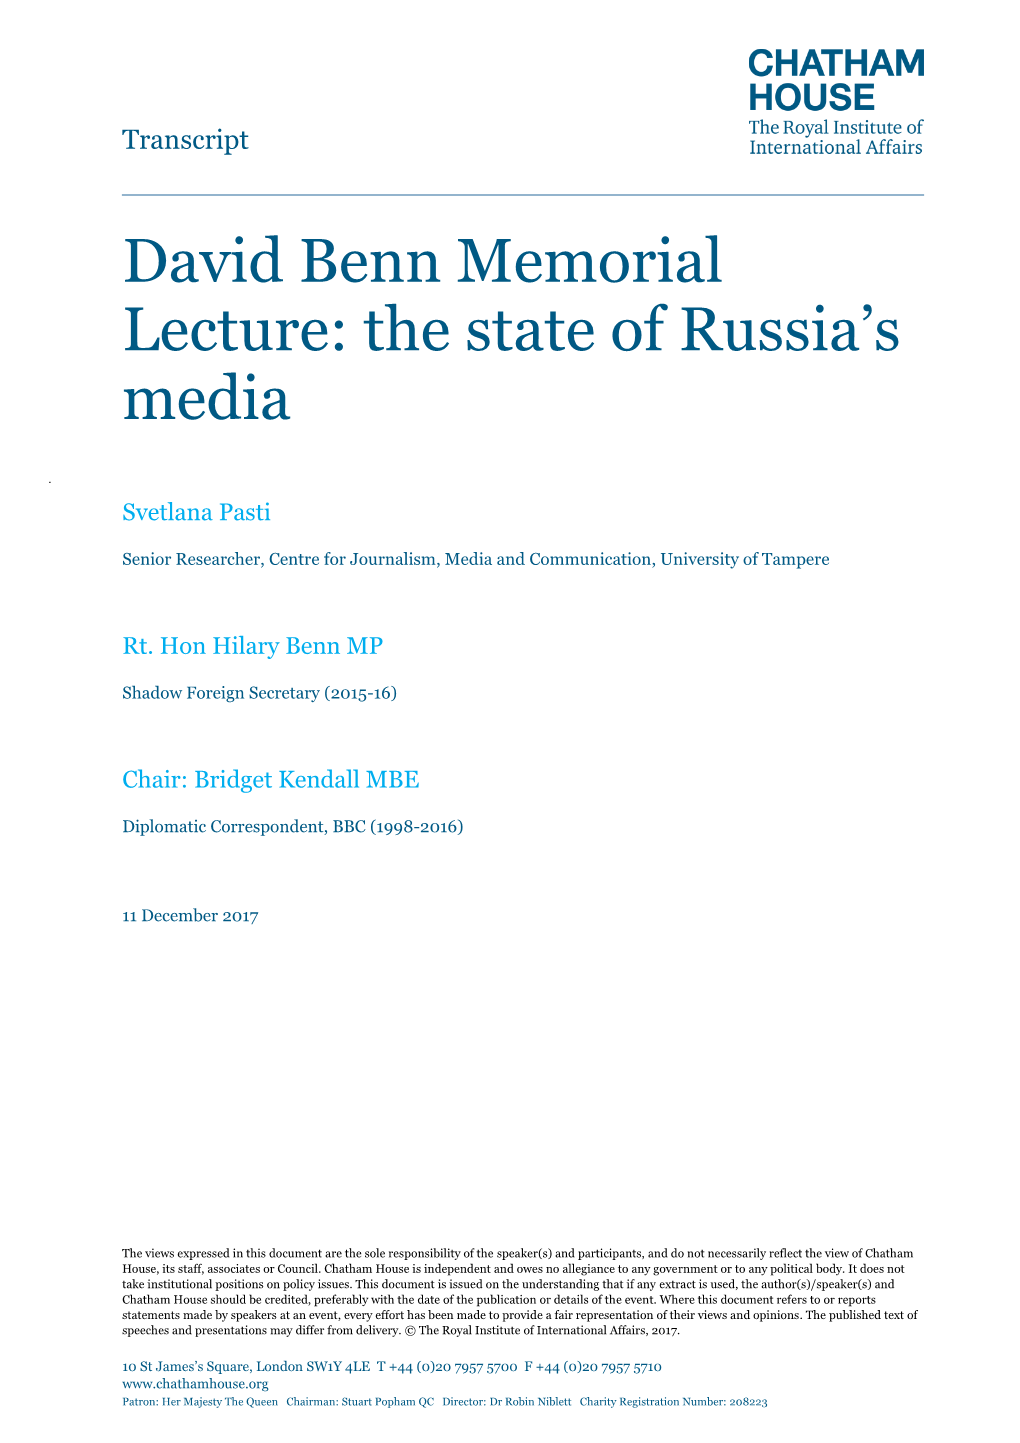 David Benn Memorial Lecture: the State of Russia's Media